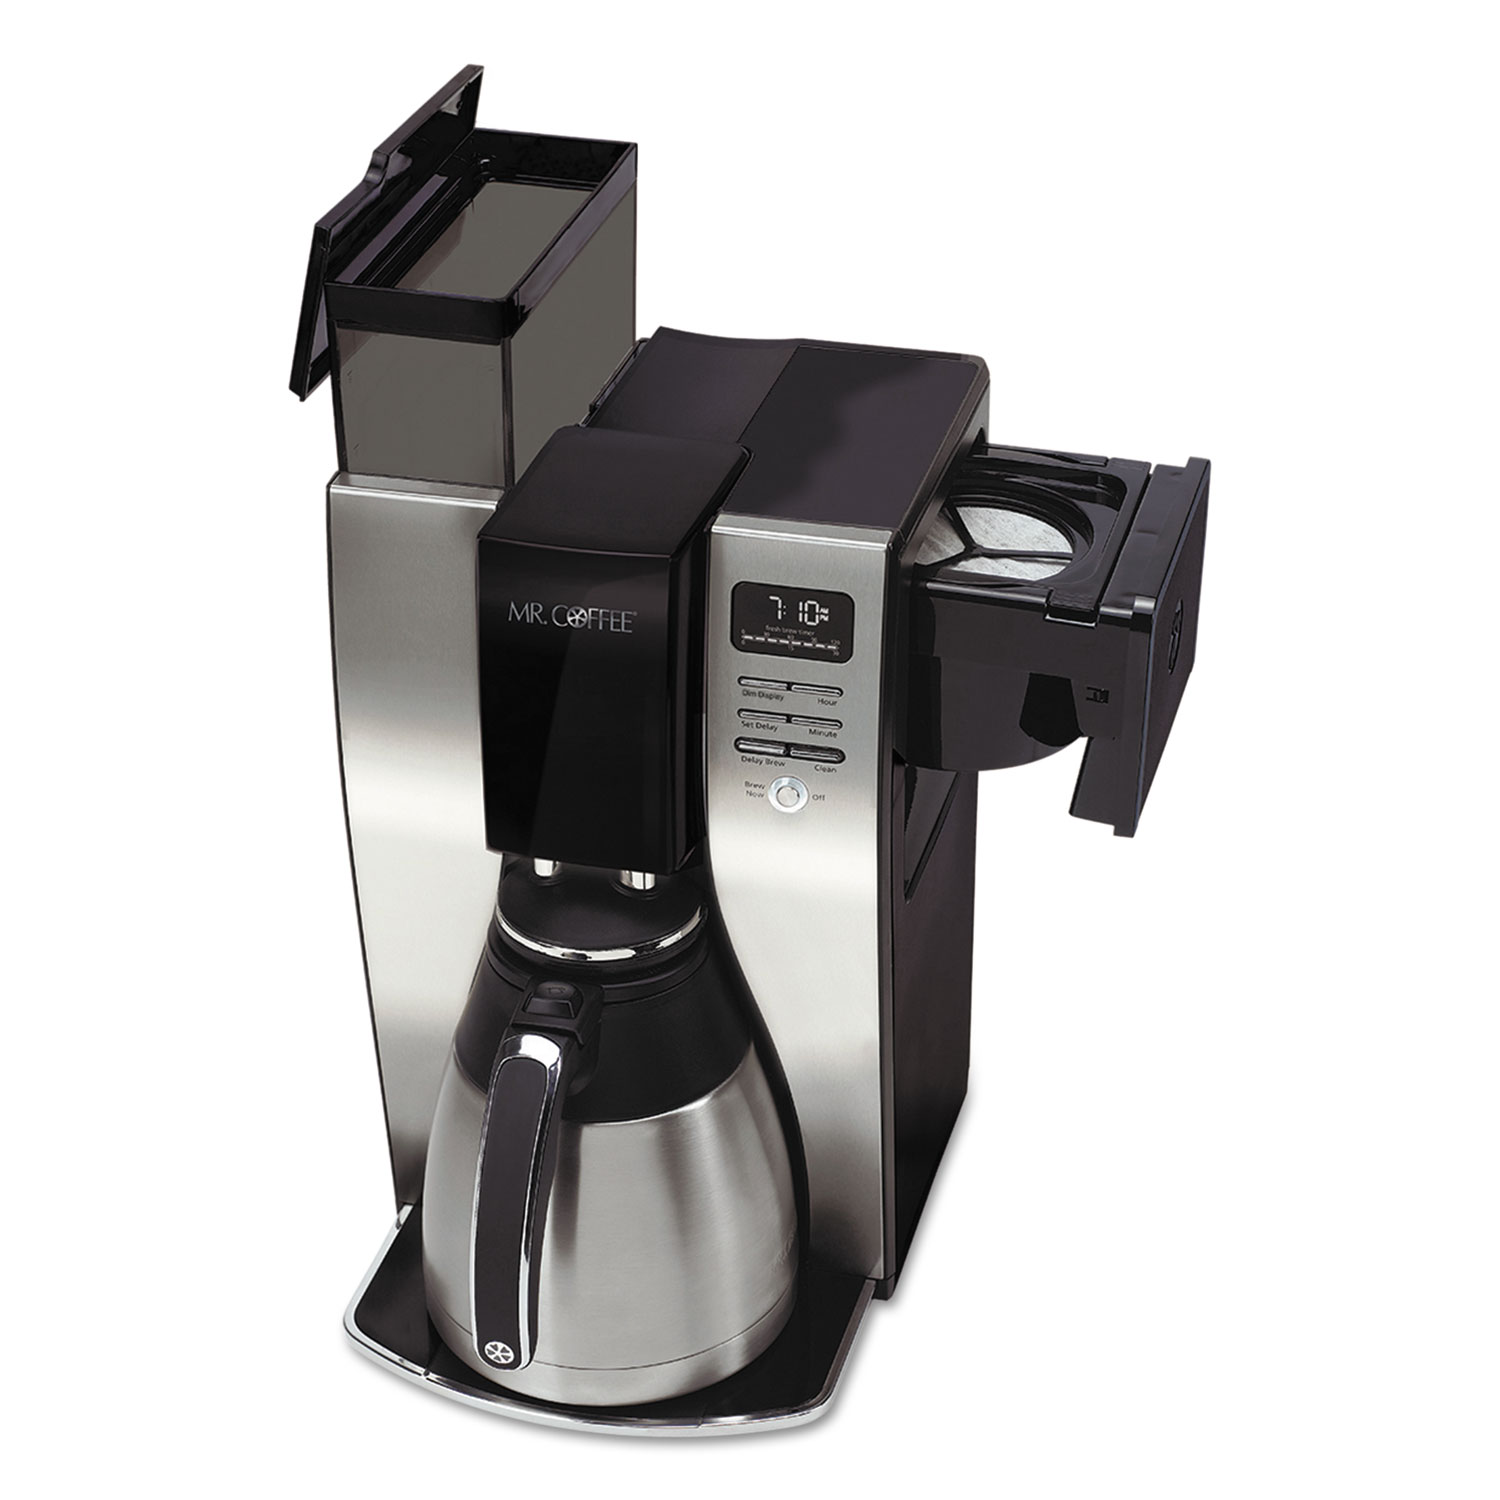  Mr. Coffee BVMCPSTX91RB Optimal Brew 10-Cup Thermal Programmable Coffeemaker, Black/Brushed Silver (MFEBVMCPSTX91) 